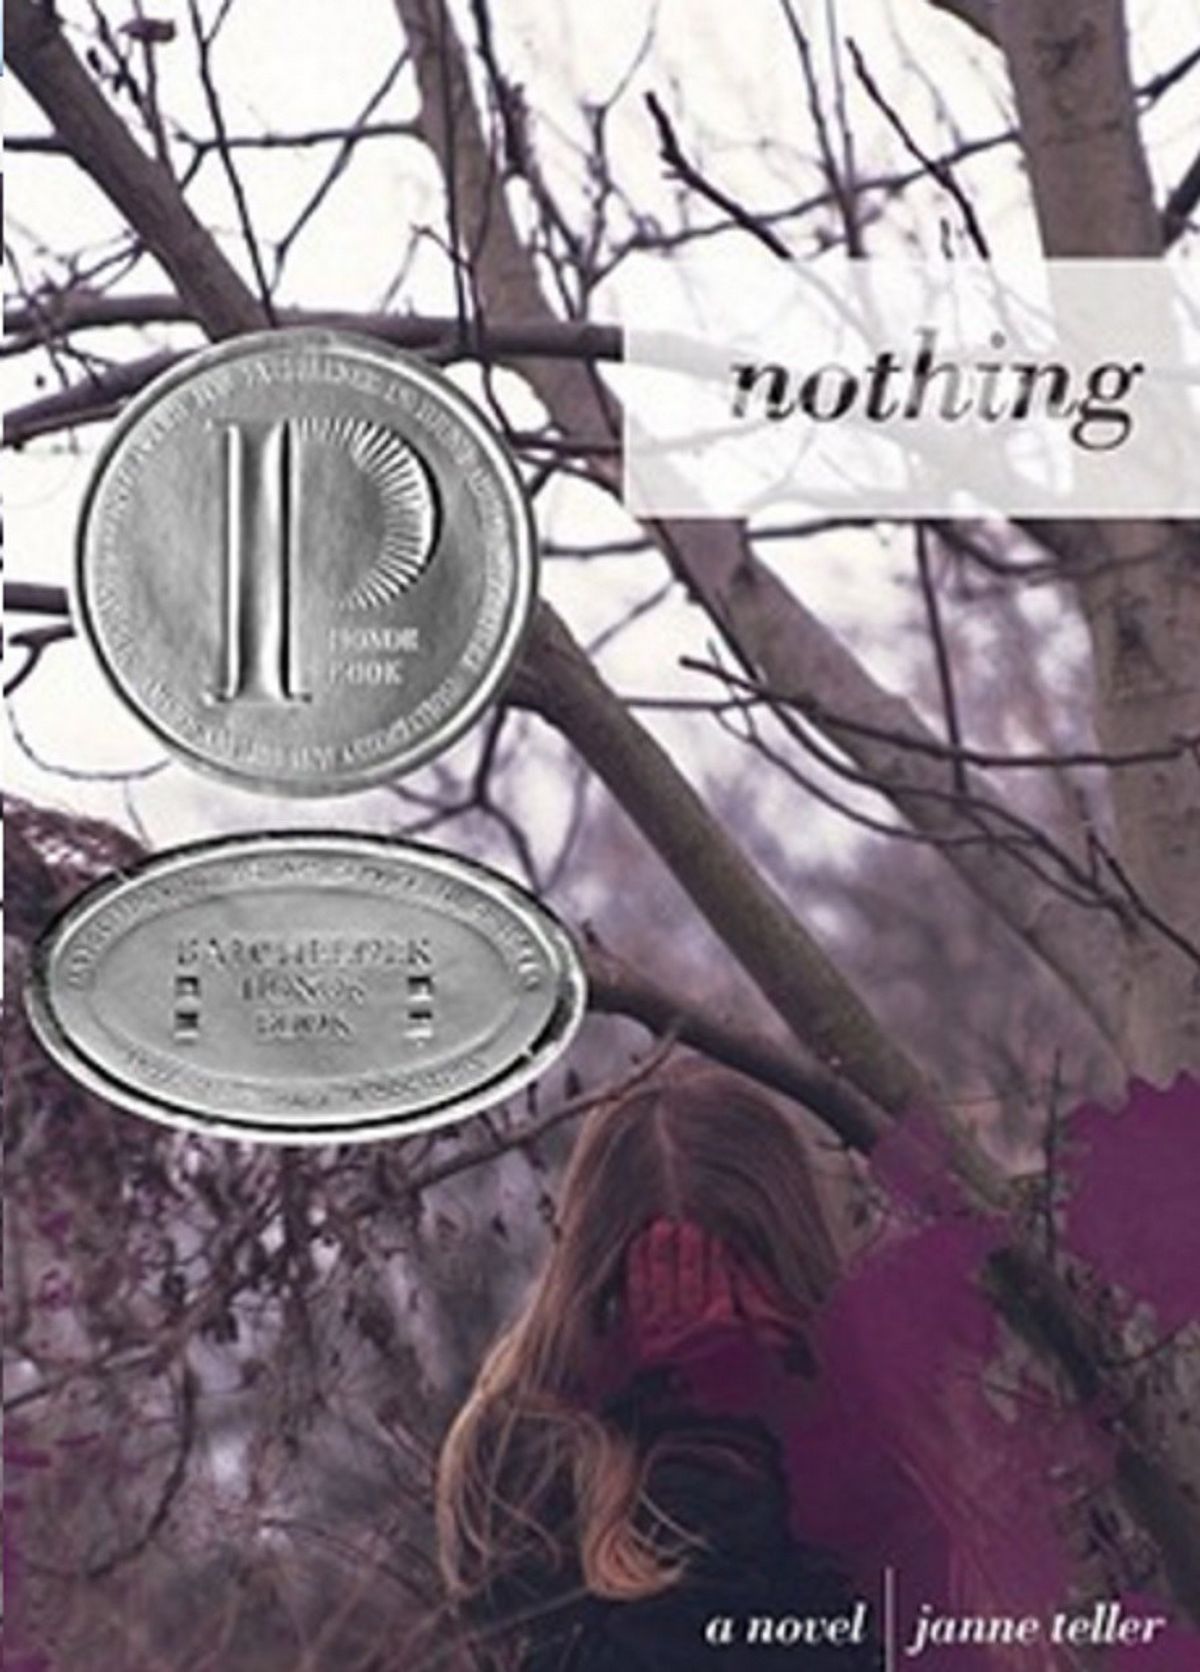 Review of "Nothing" by Janne Teller